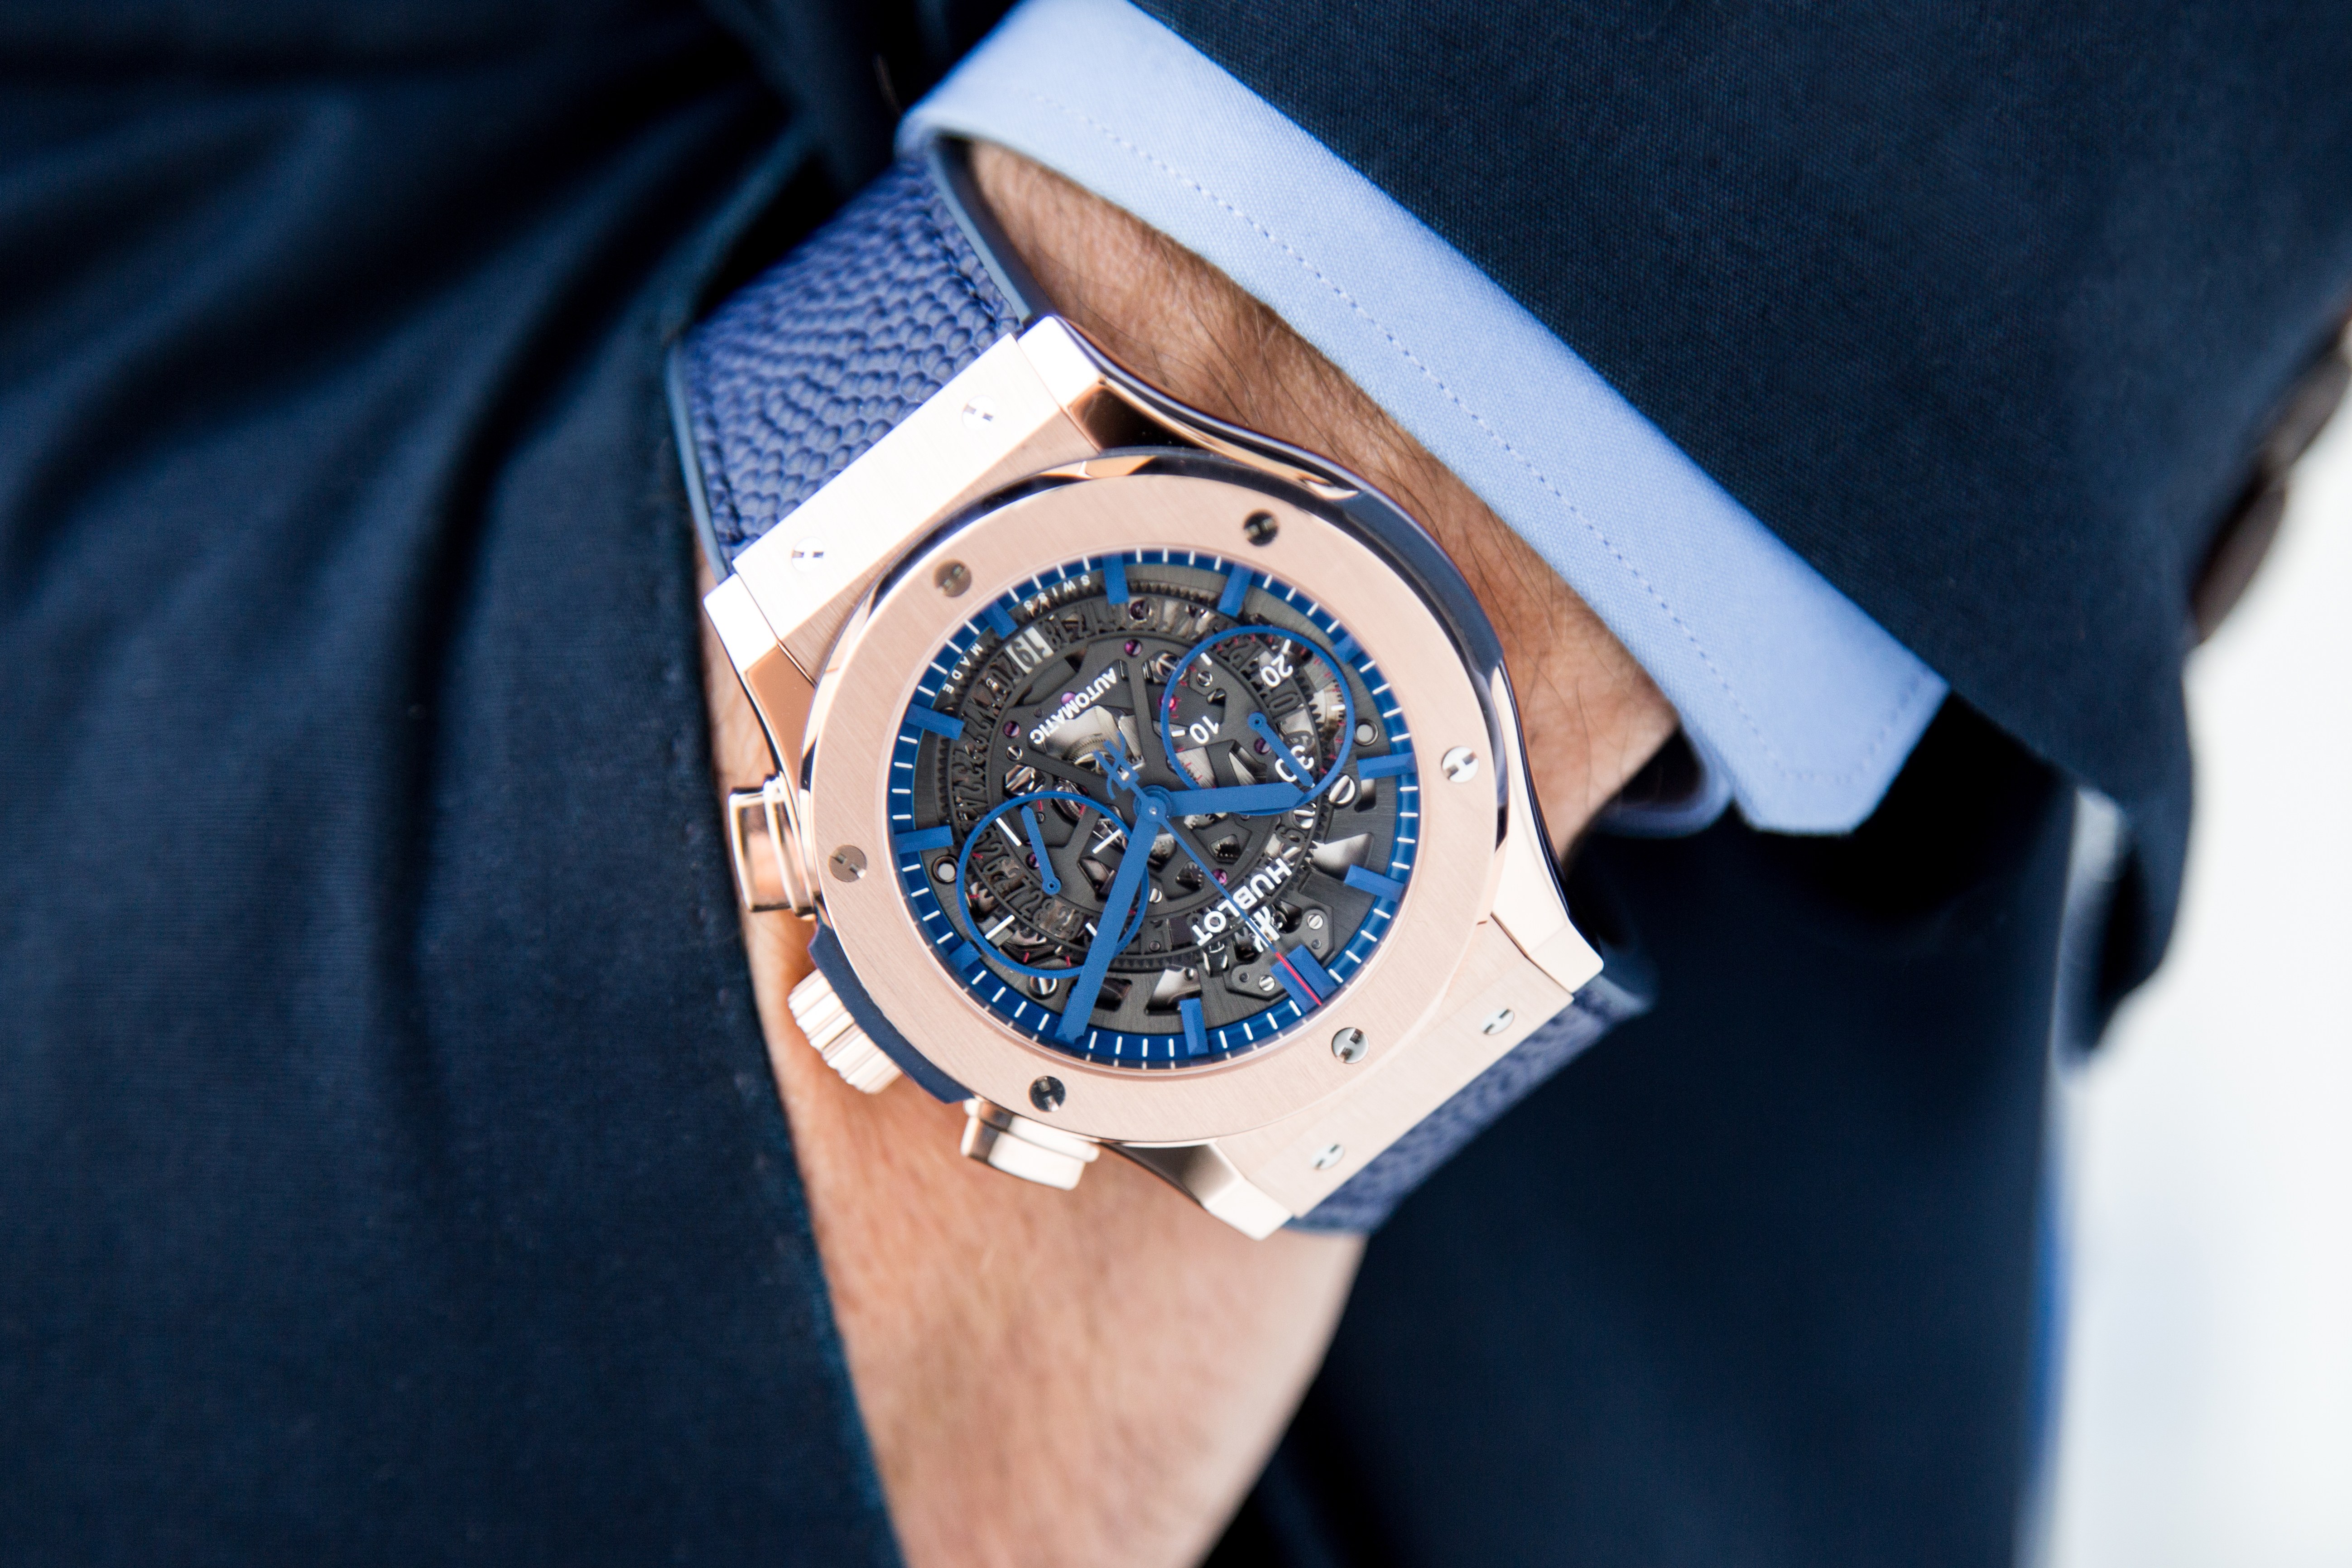 Watch Of The Week News, In-Depth Articles, Pictures & Videos | GQ